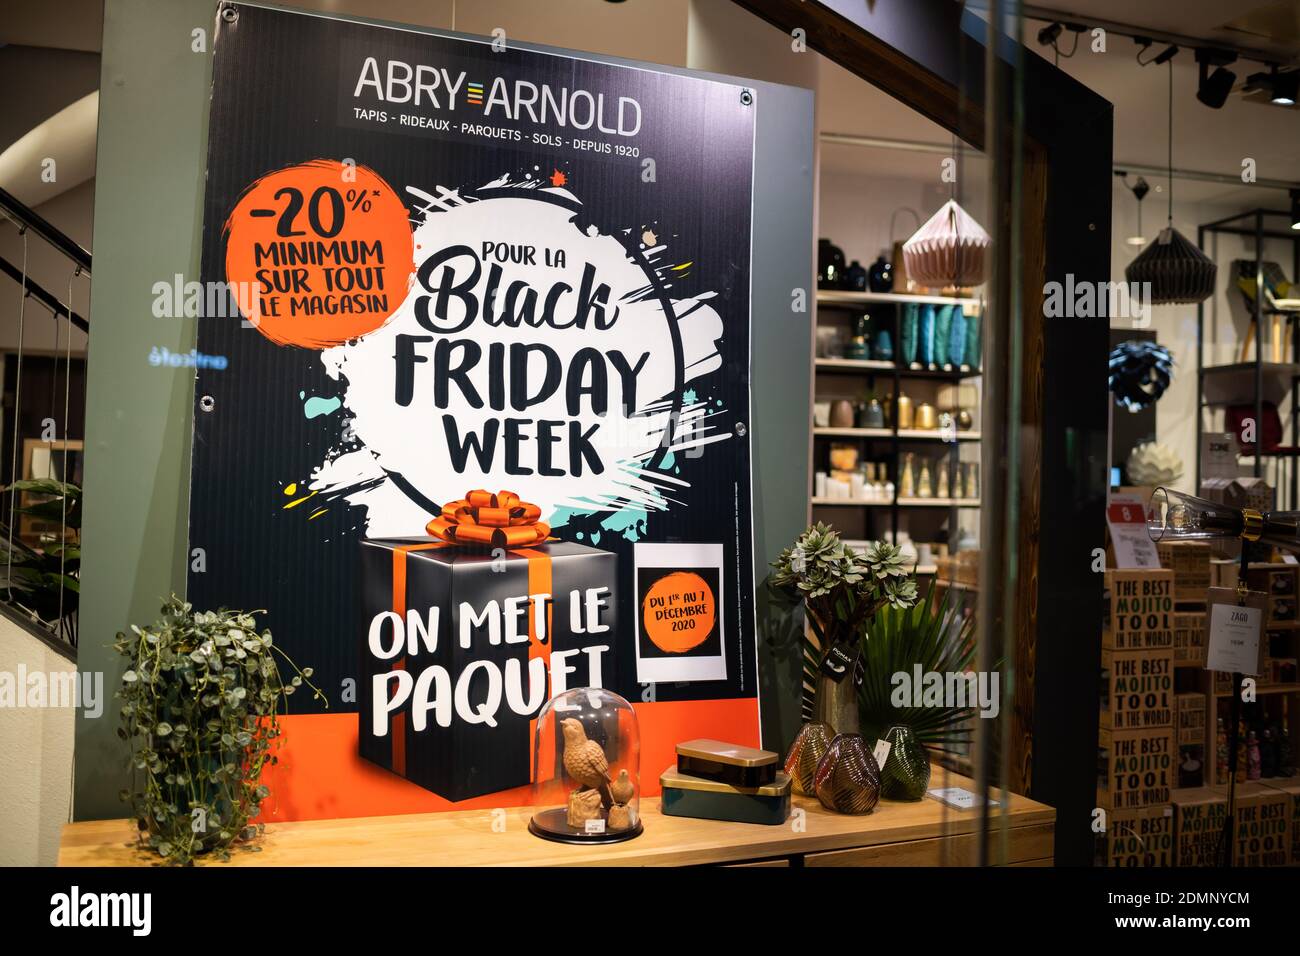 Strasbourg, France - Dec 4, 2020: Black Friday week advertising to Abry  Arnold store on the showcase of main store in Strasbourg Photo Stock - Alamy